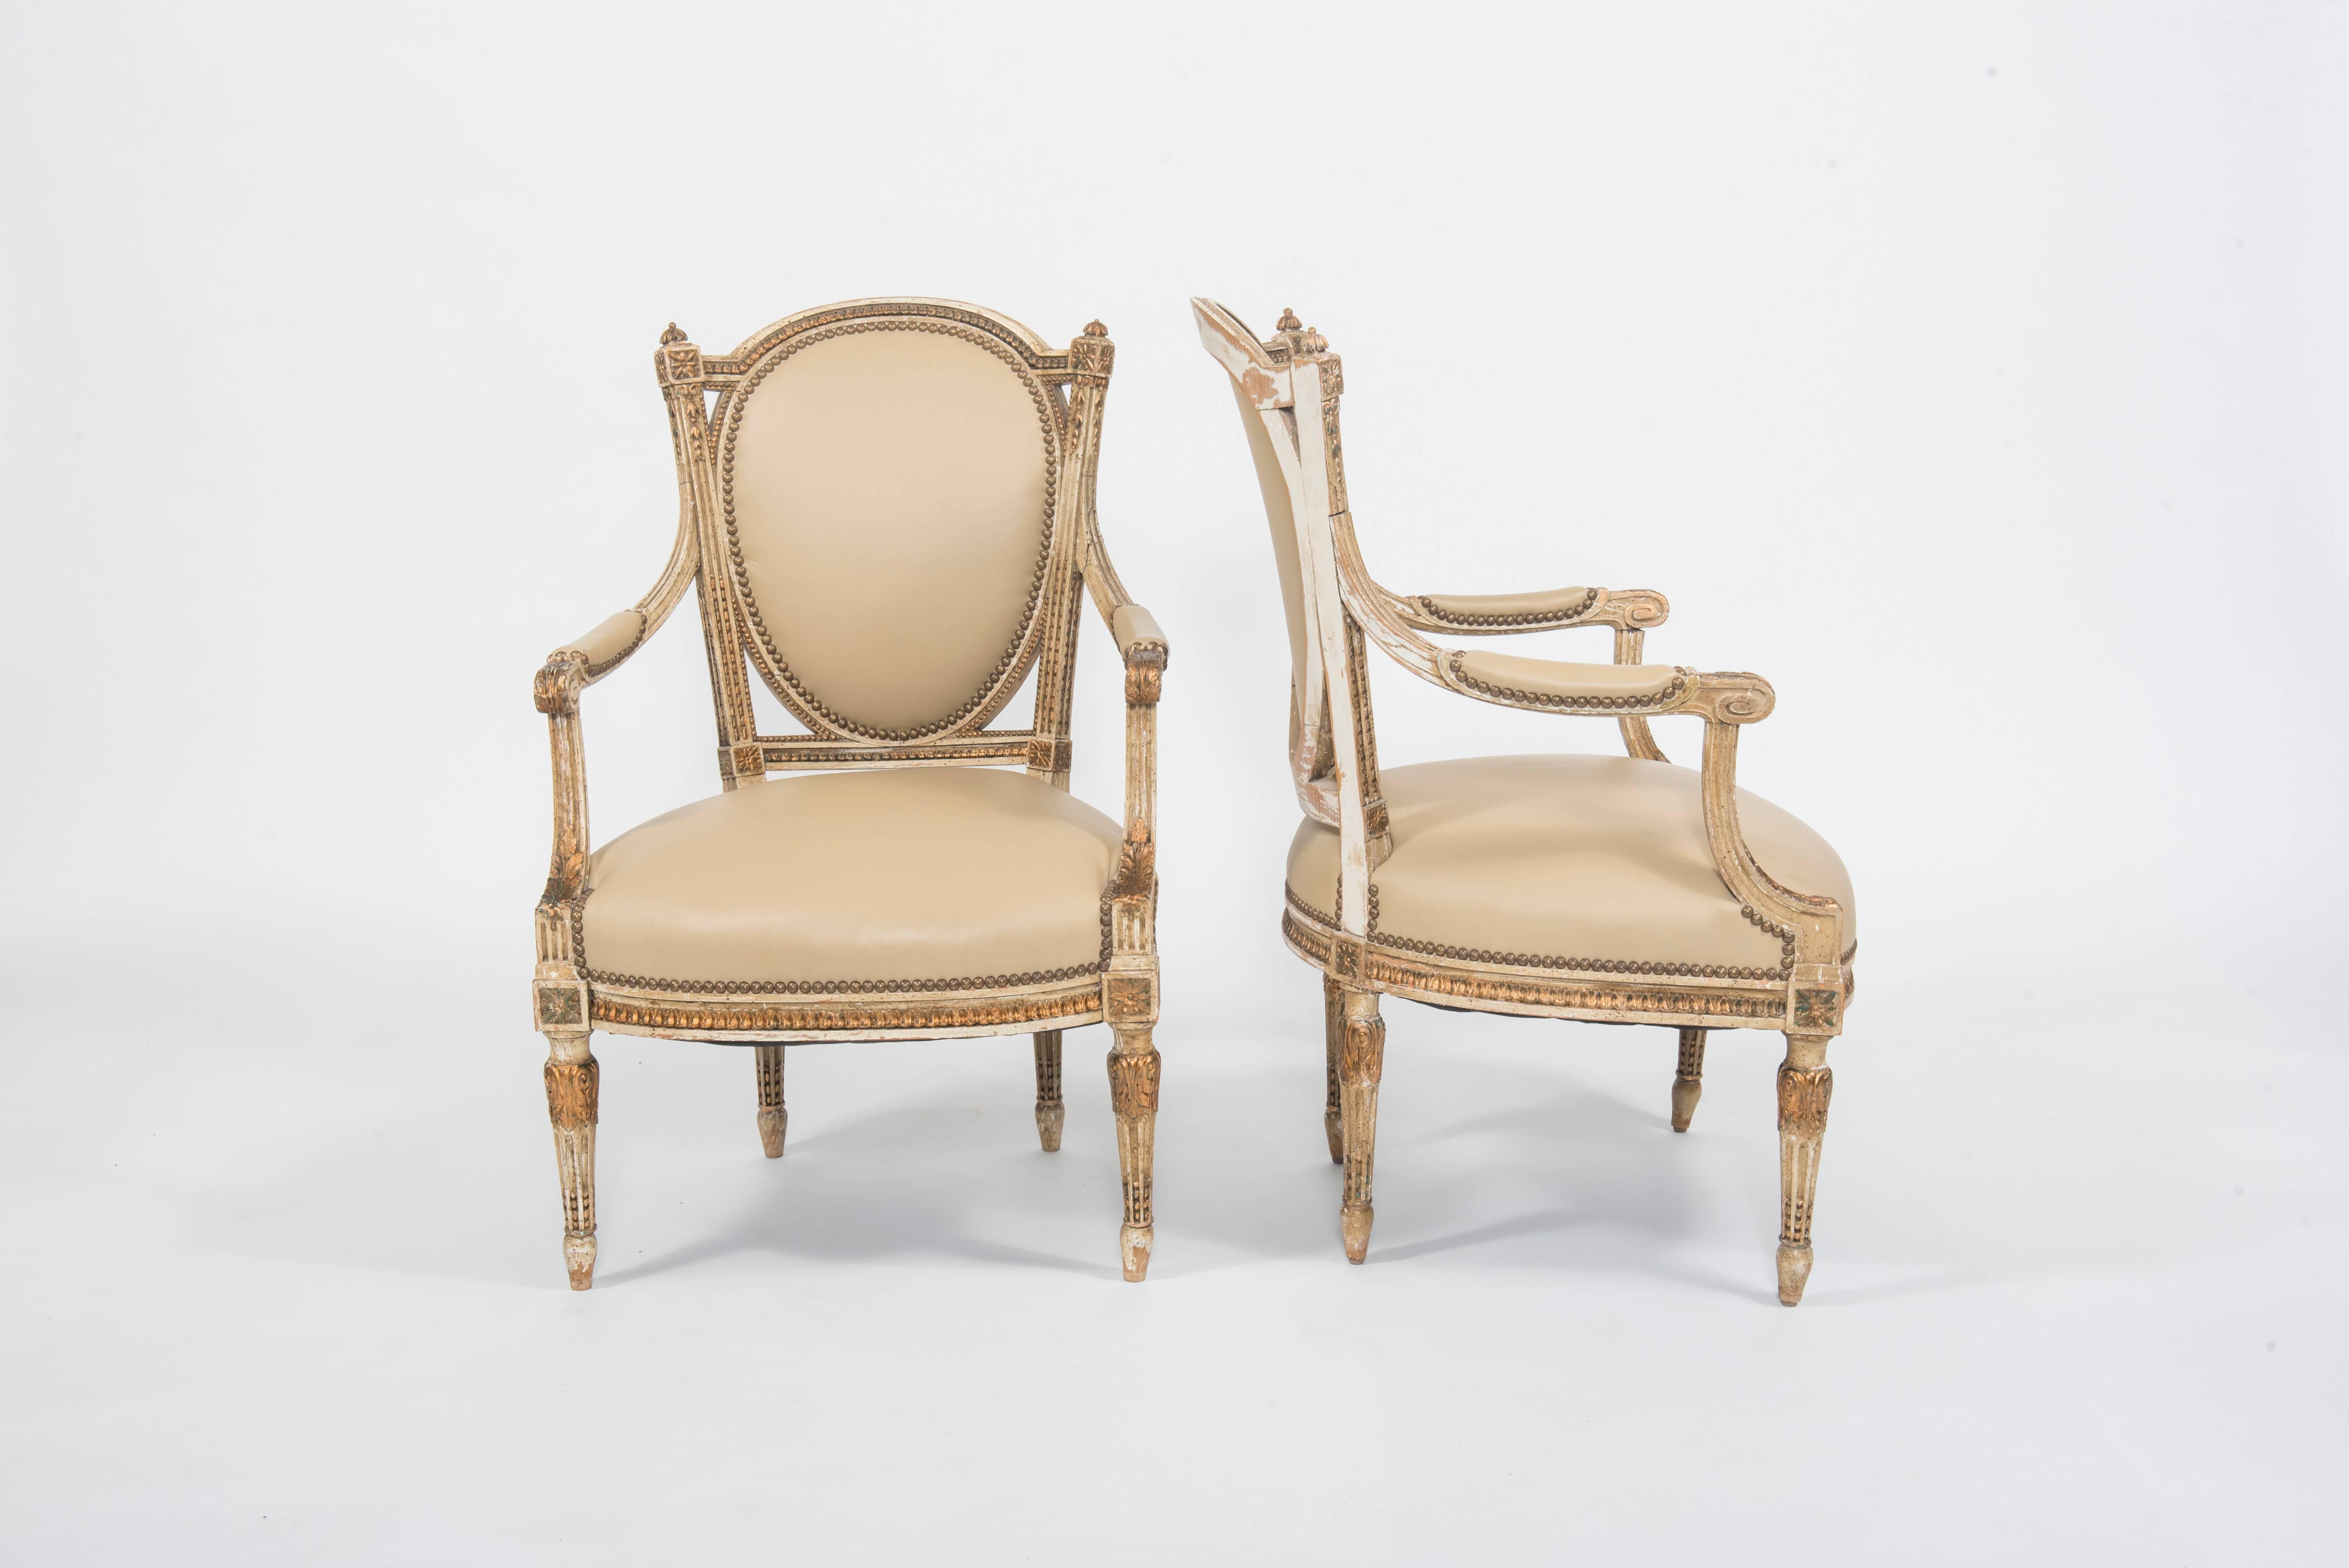 Pair of early 20th century painted and gilt French Louis XVI style fauteuils newly upholstered in an Italian blond bone colored leather.